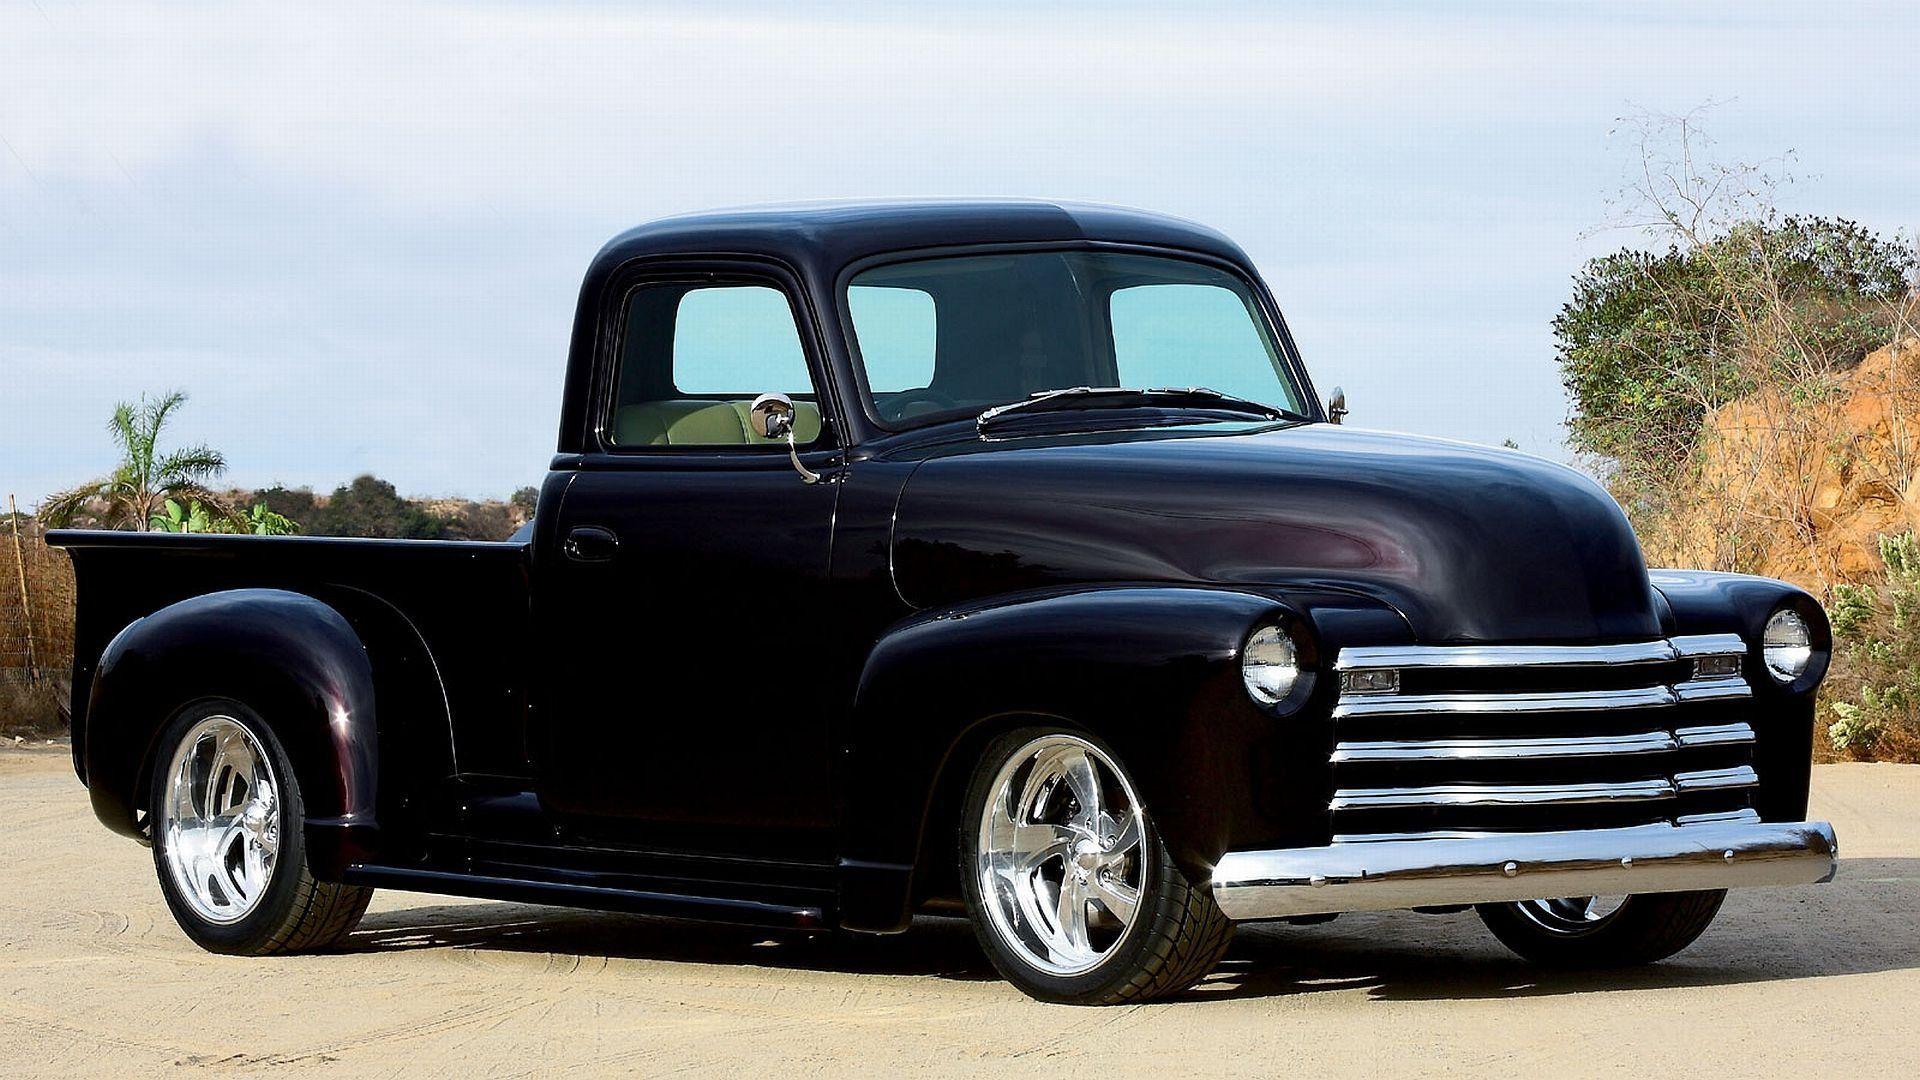 Jacked Up Chevy Truck Wallpaper The Galleries of HD Wallpaper